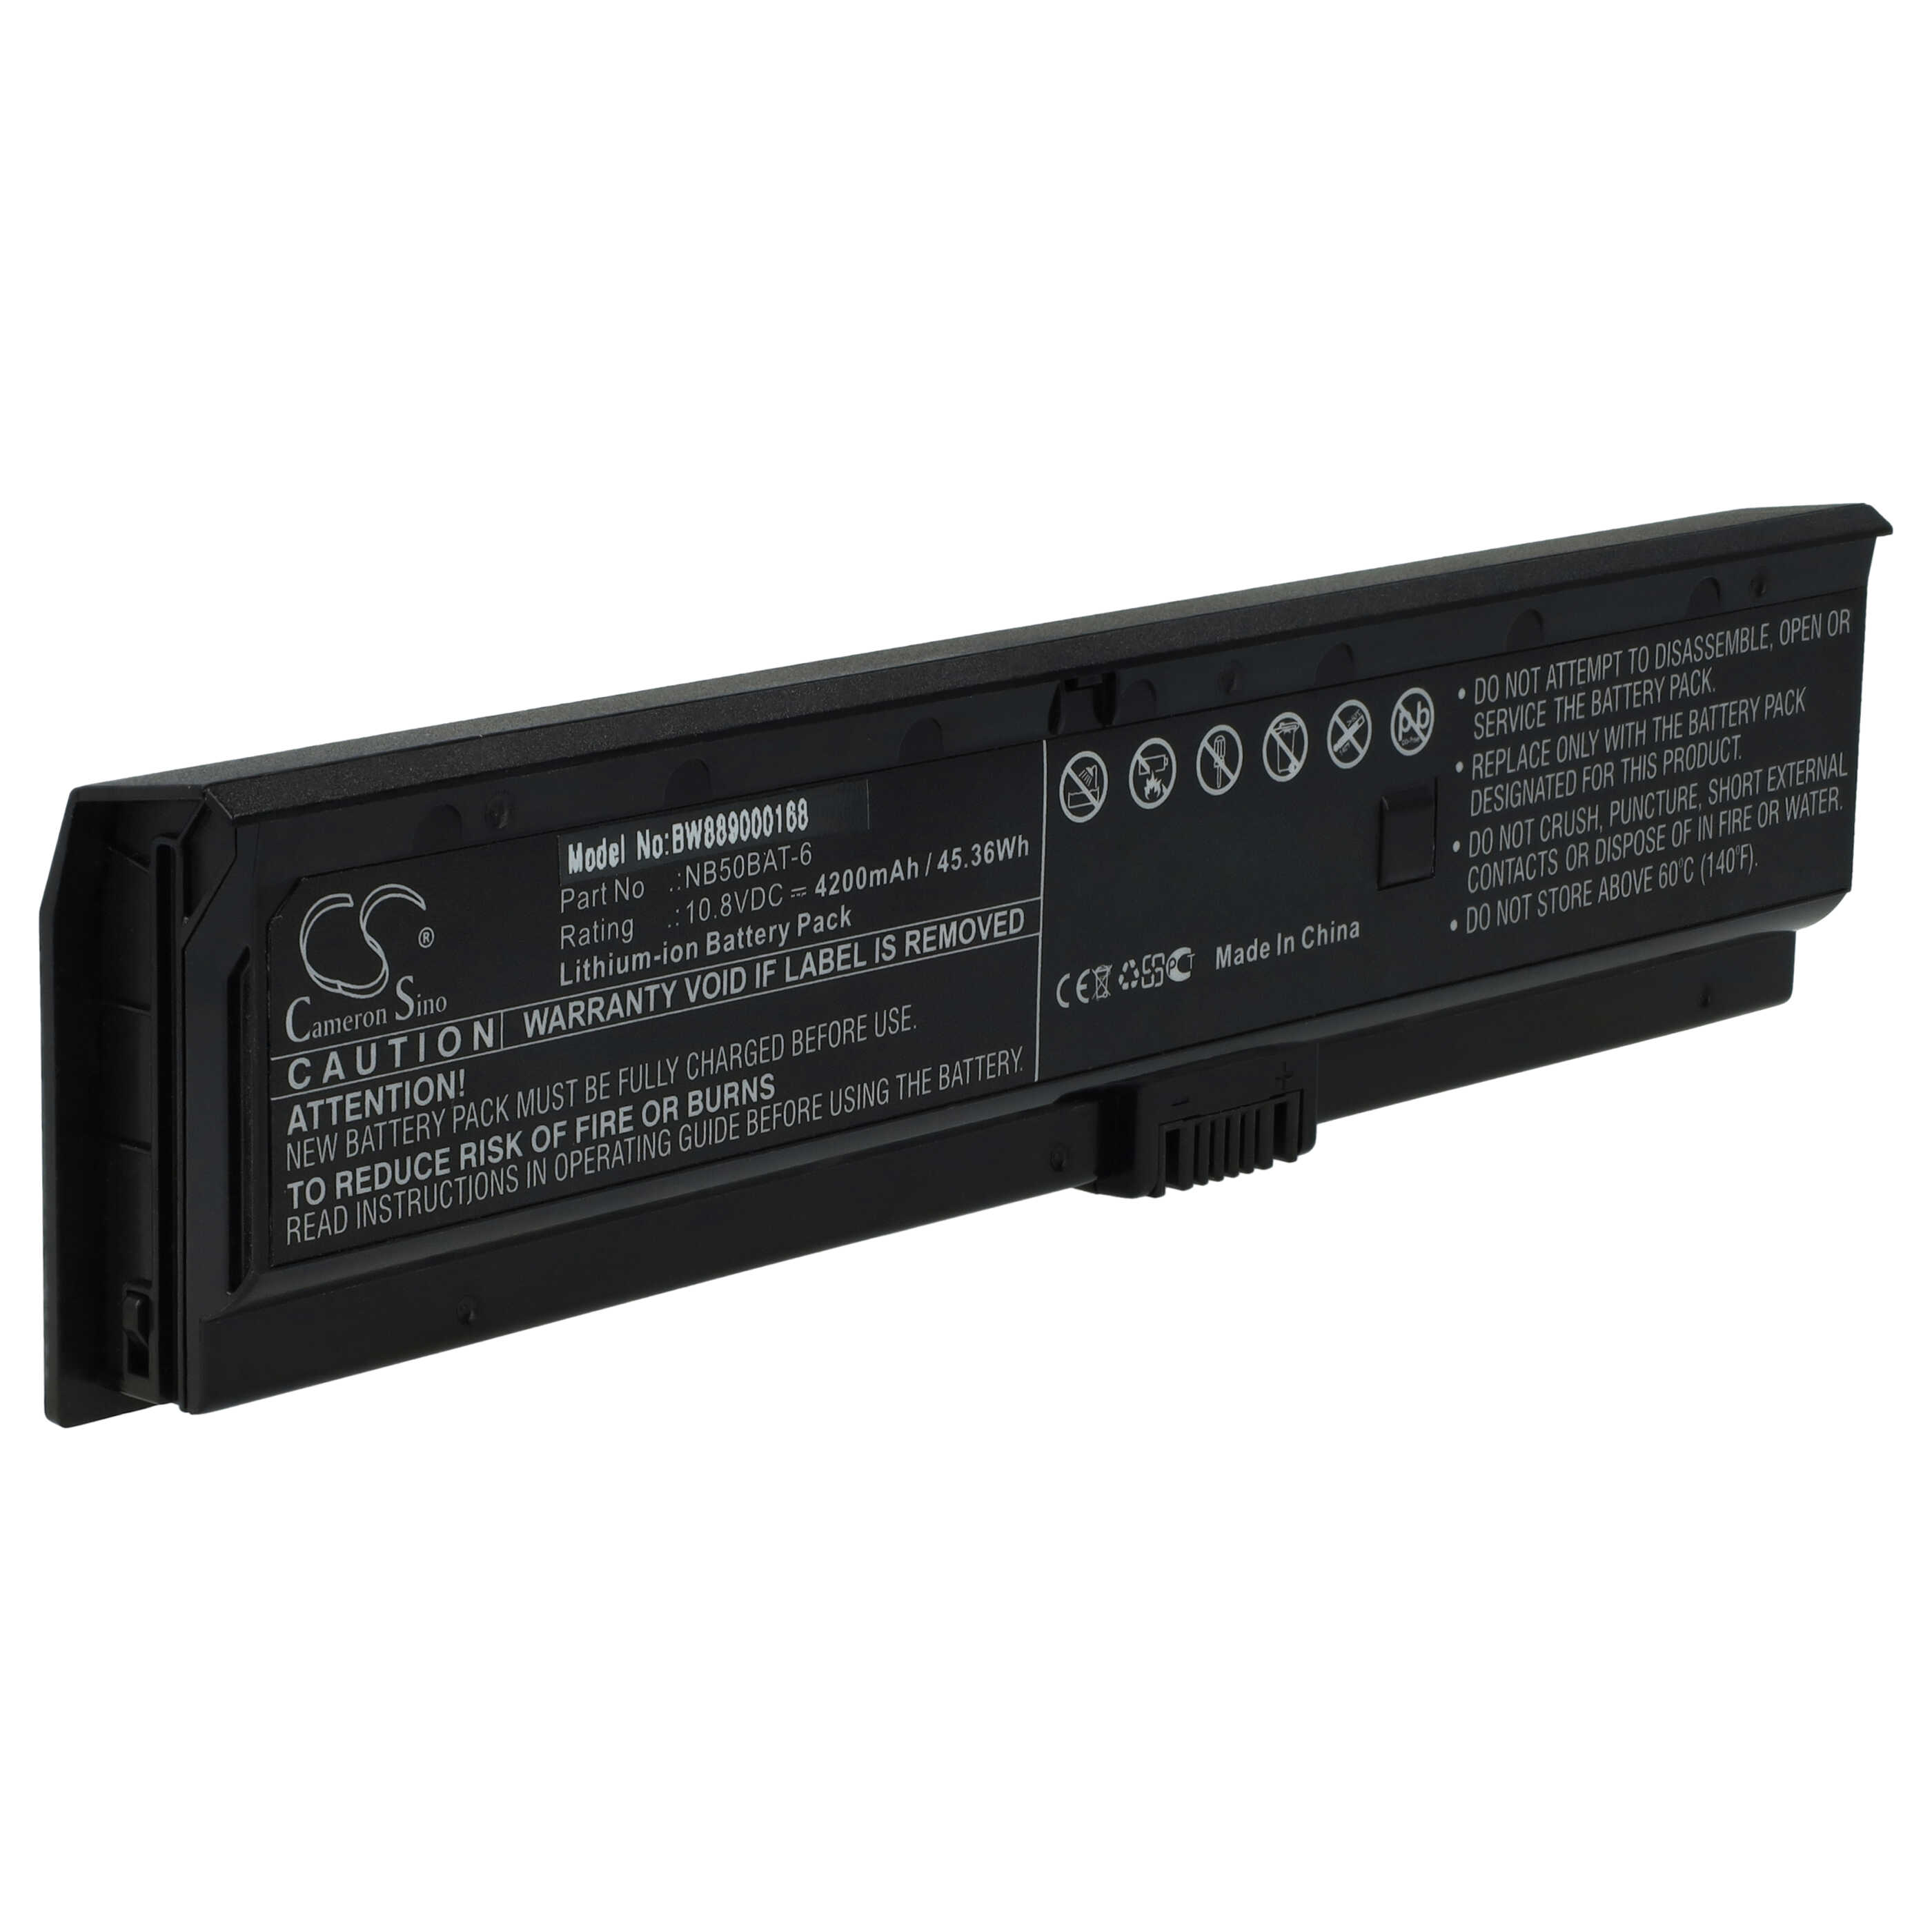 Notebook Battery Replacement for Clevo NB50BAT-6 - 4200mAh 10.8V Li-Ion